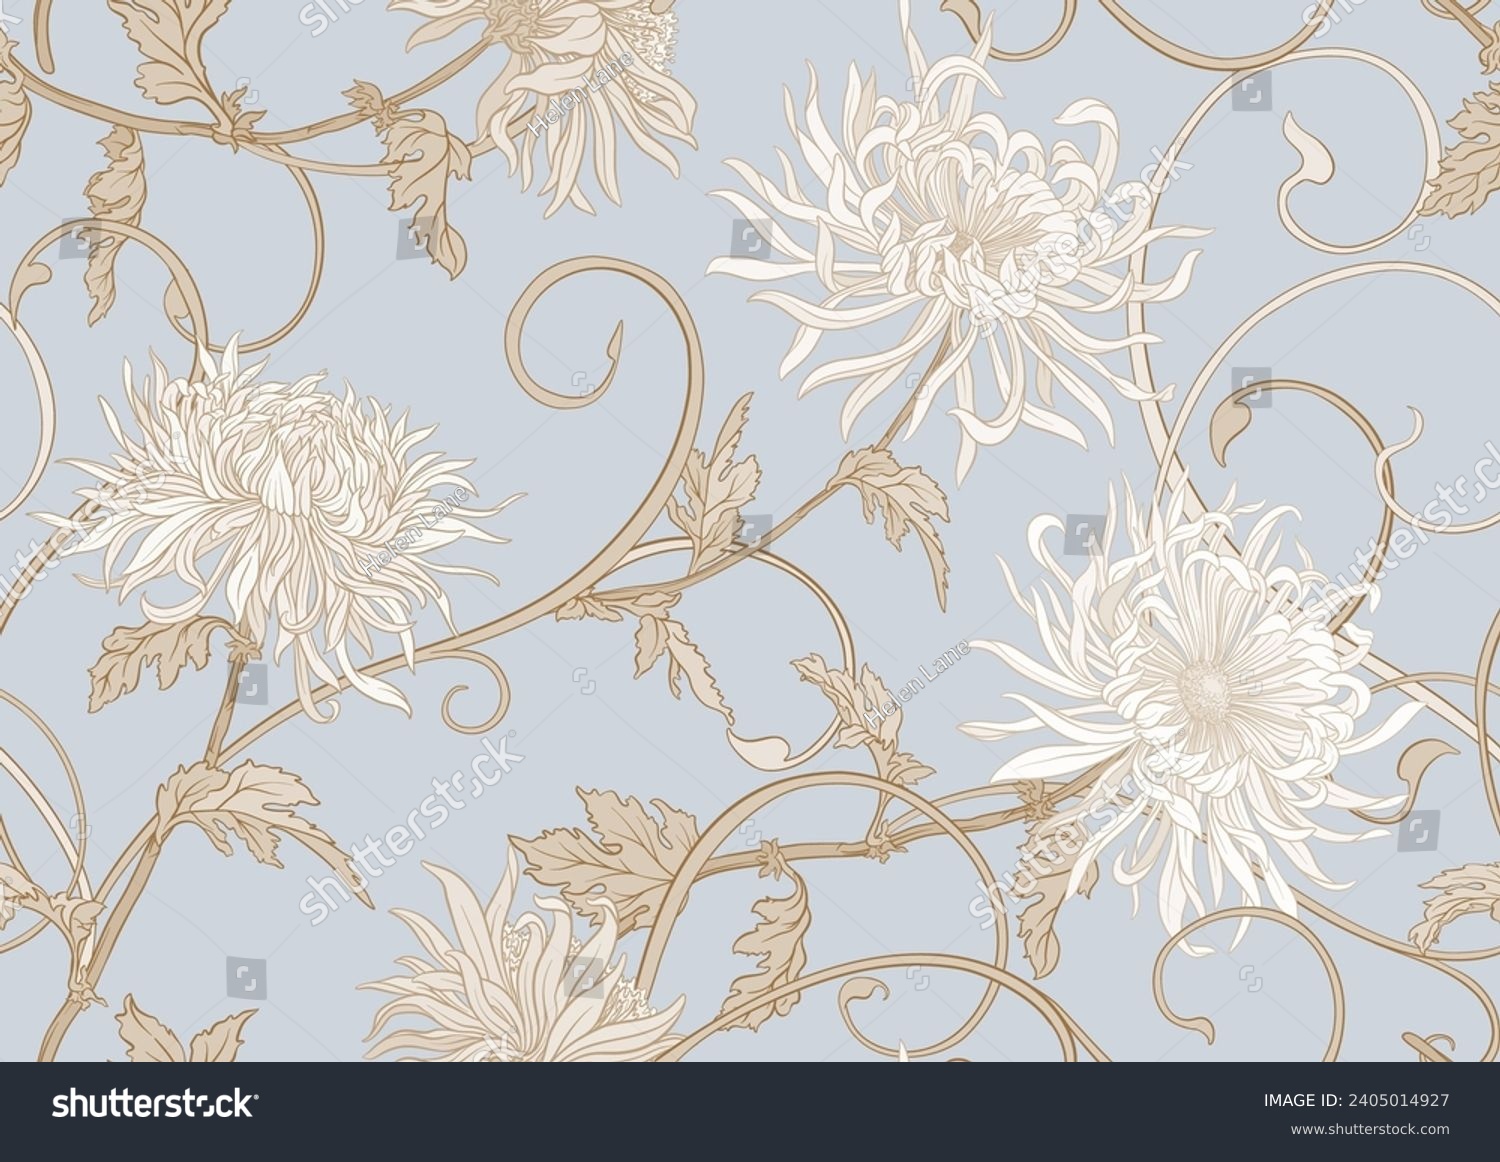 Chrysanthemum decorative flowers and leaves in art nouveau style, vintage, old, retro style. Seamless pattern, background. Vector illustration In vintage blue and beige colors #2405014927